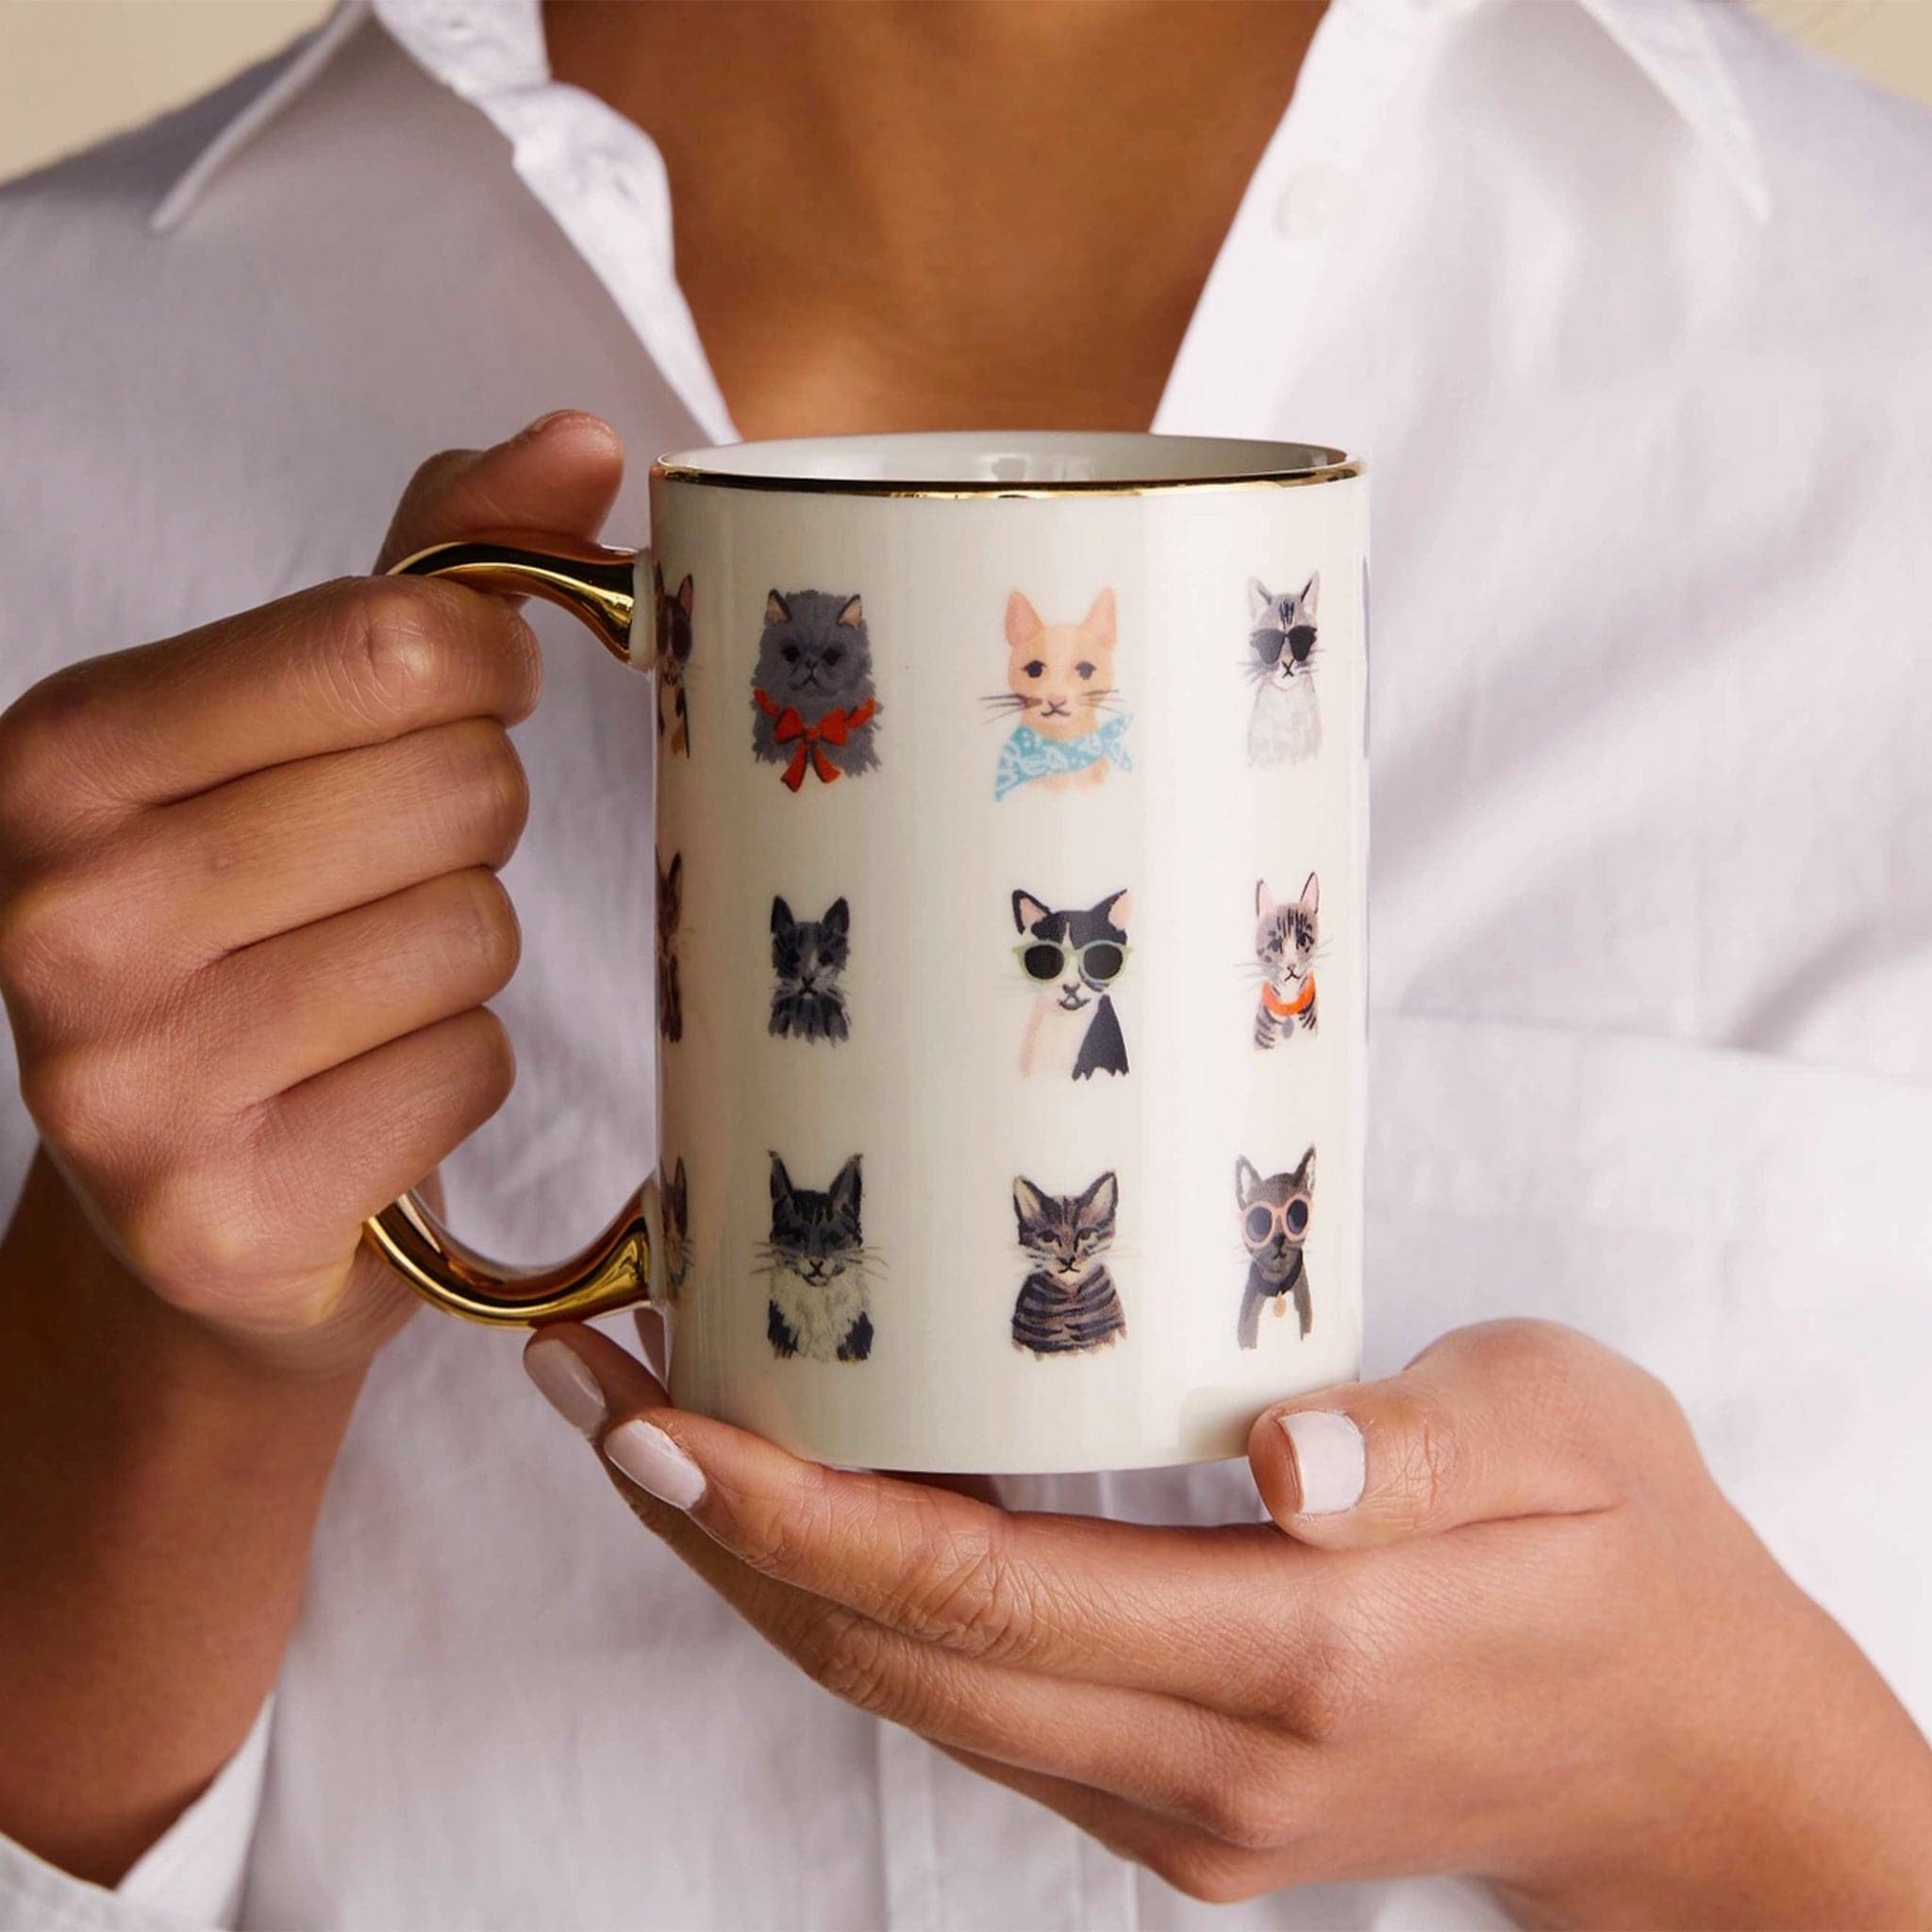 A luxurious porcelain mug featuring rows of different illustrated cats. Some cats are wearing cool sunglasses and patterned bandanas. This mug also has a gold handle and trim.